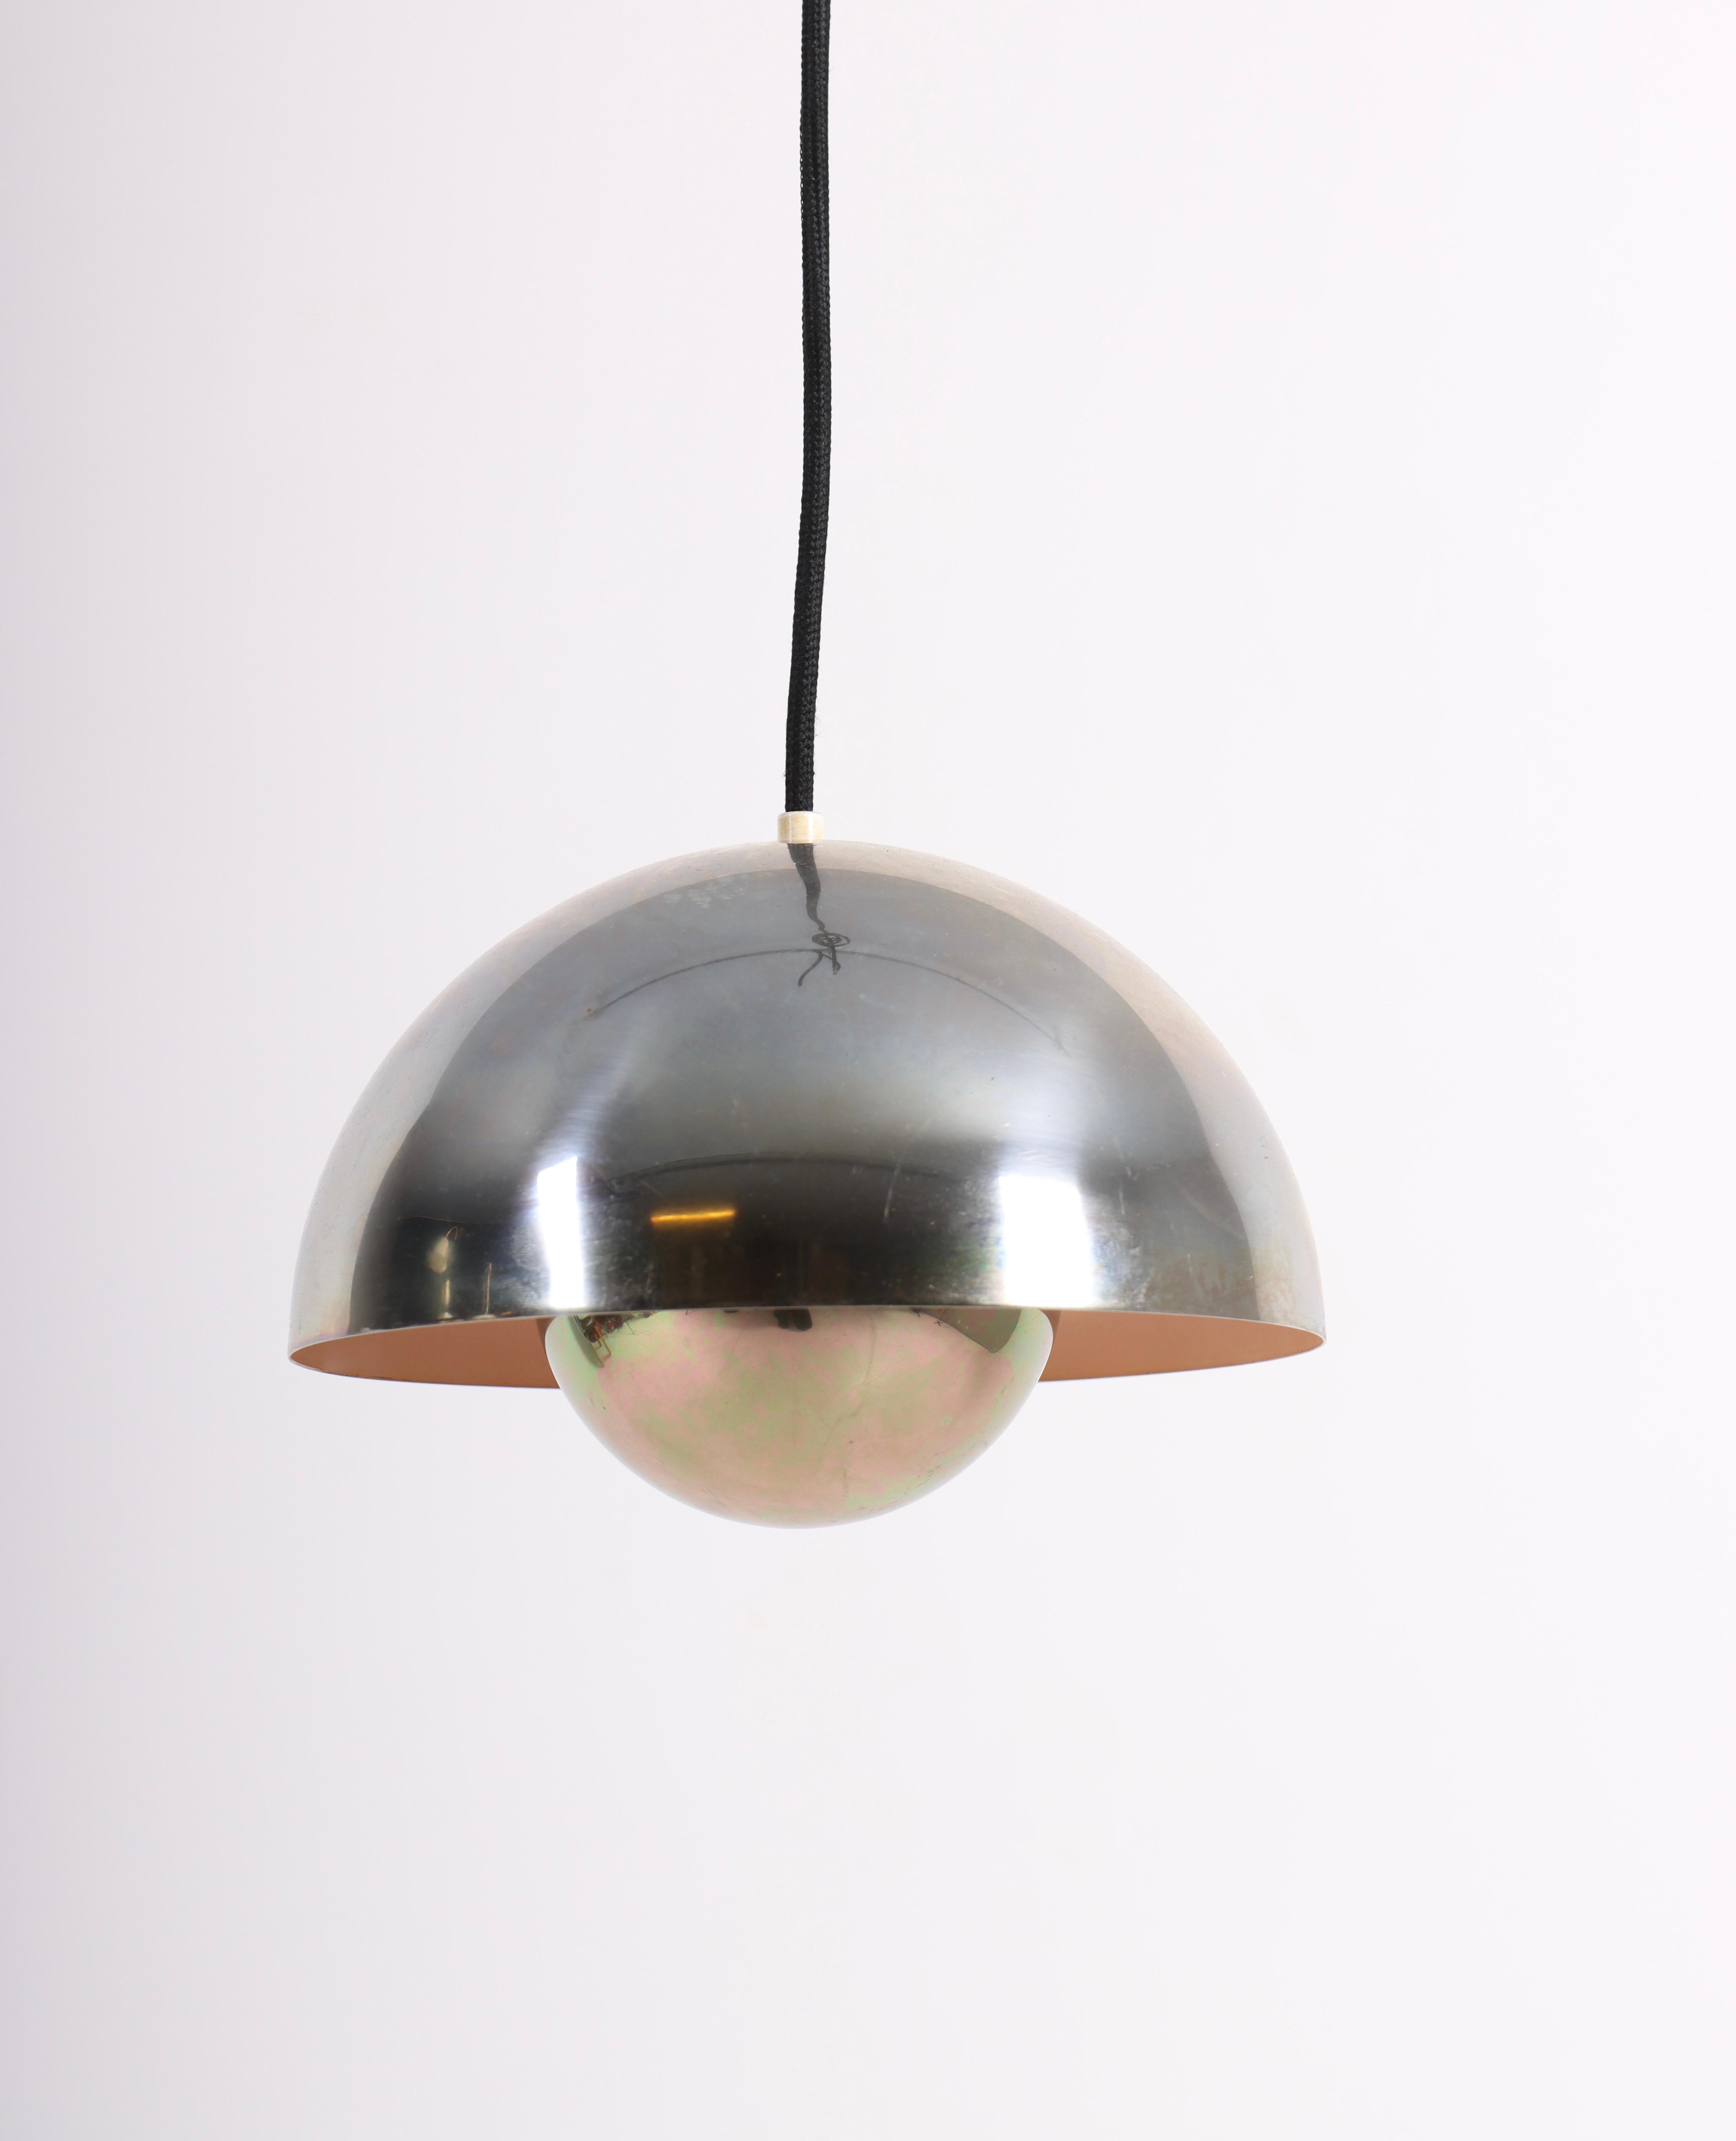 Pendant designed by Verner Panton for Louis Poulsen, Denmark in the 1960s. Great original condition.